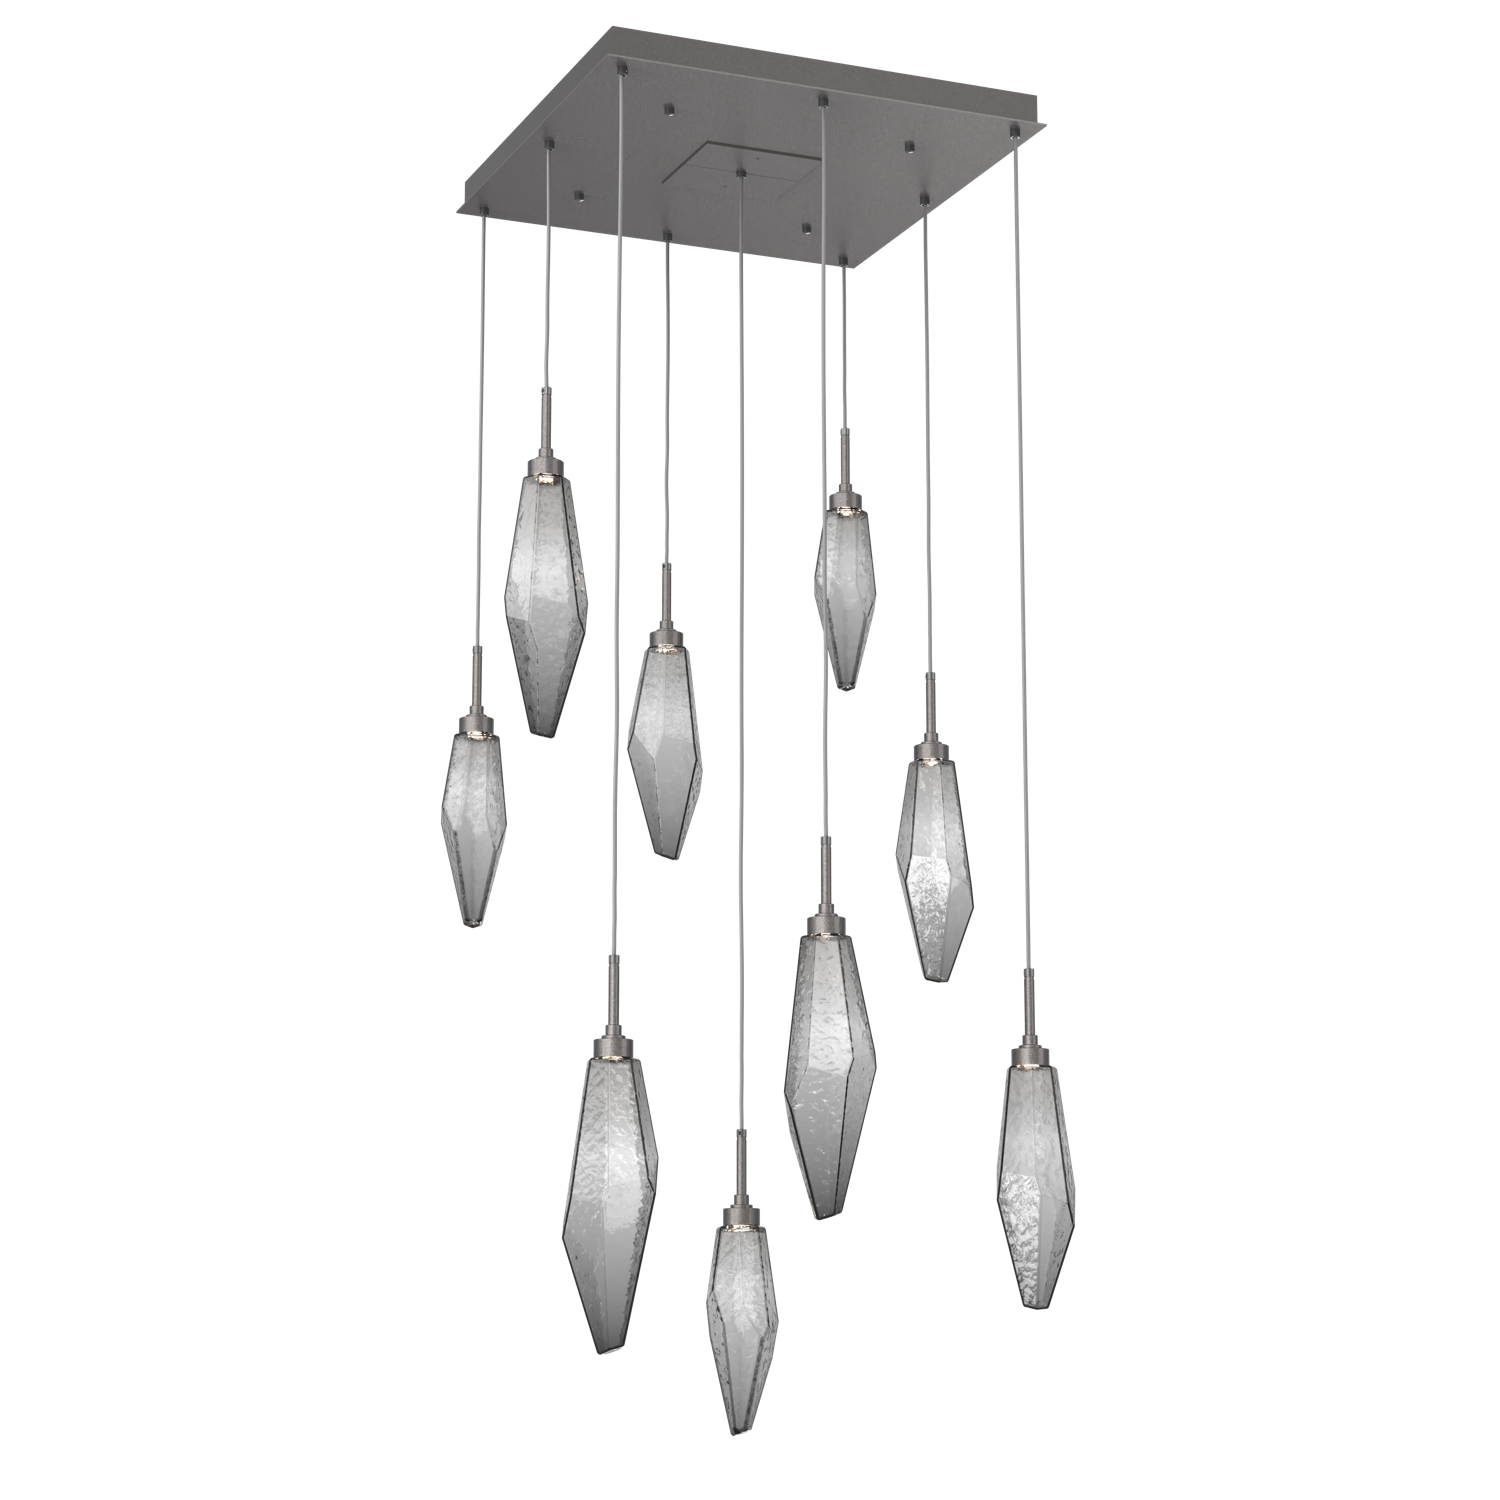 CHB0050-09-GP-CS-Hammerton-Studio-Rock-Crystal-9-light-square-pendant-chandelier-with-graphite-finish-and-chilled-smoke-glass-shades-and-LED-lamping